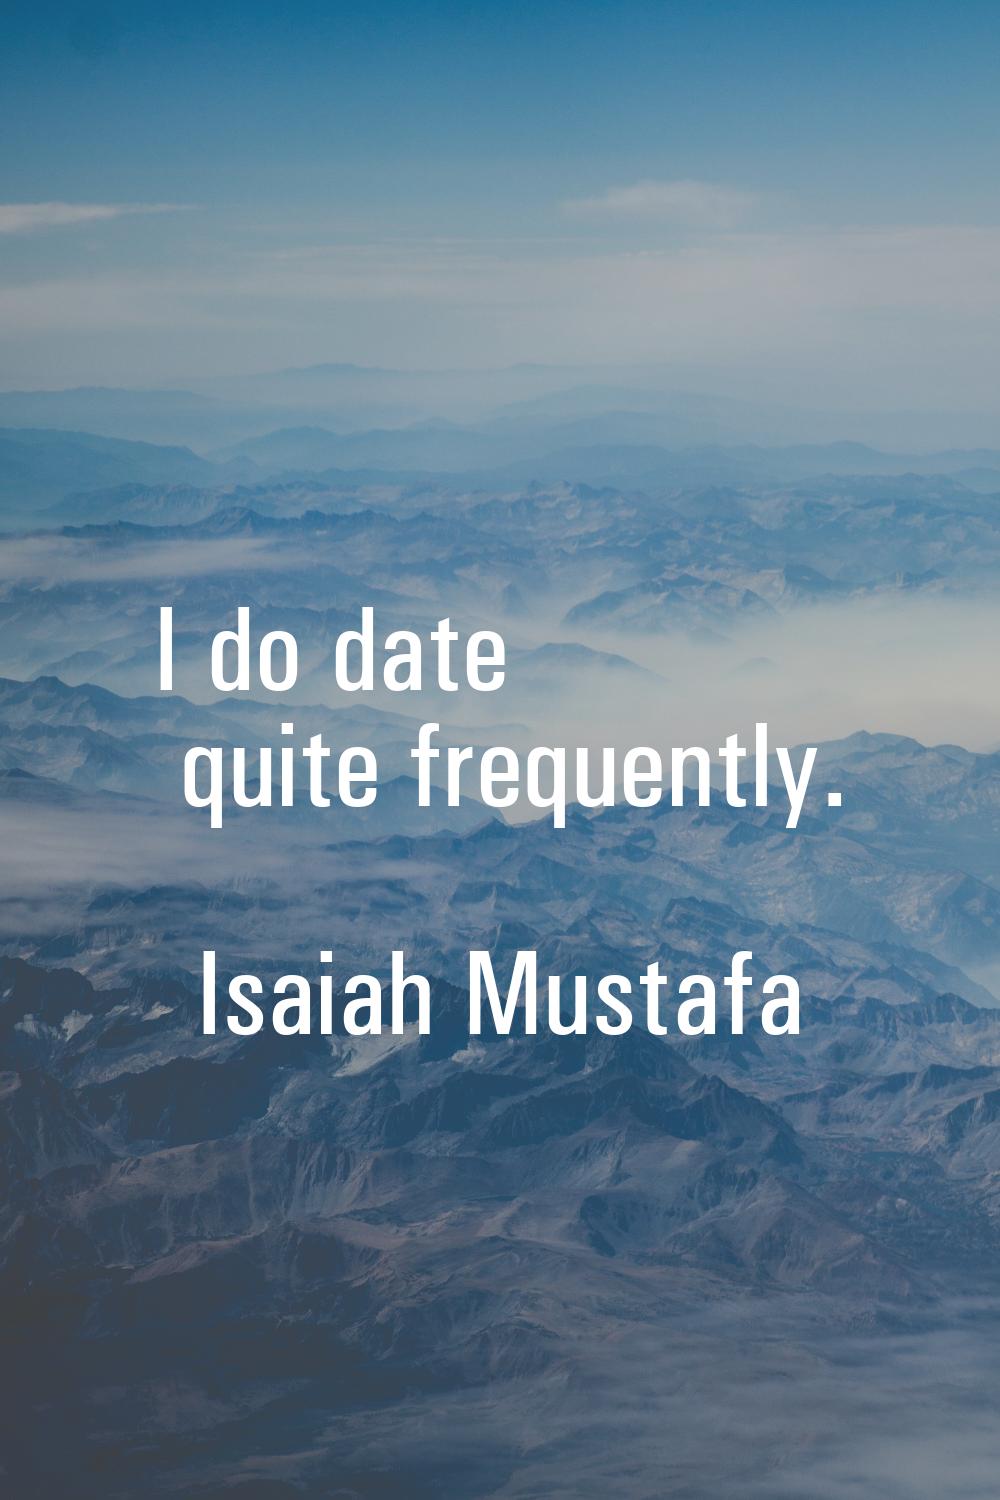 I do date quite frequently.